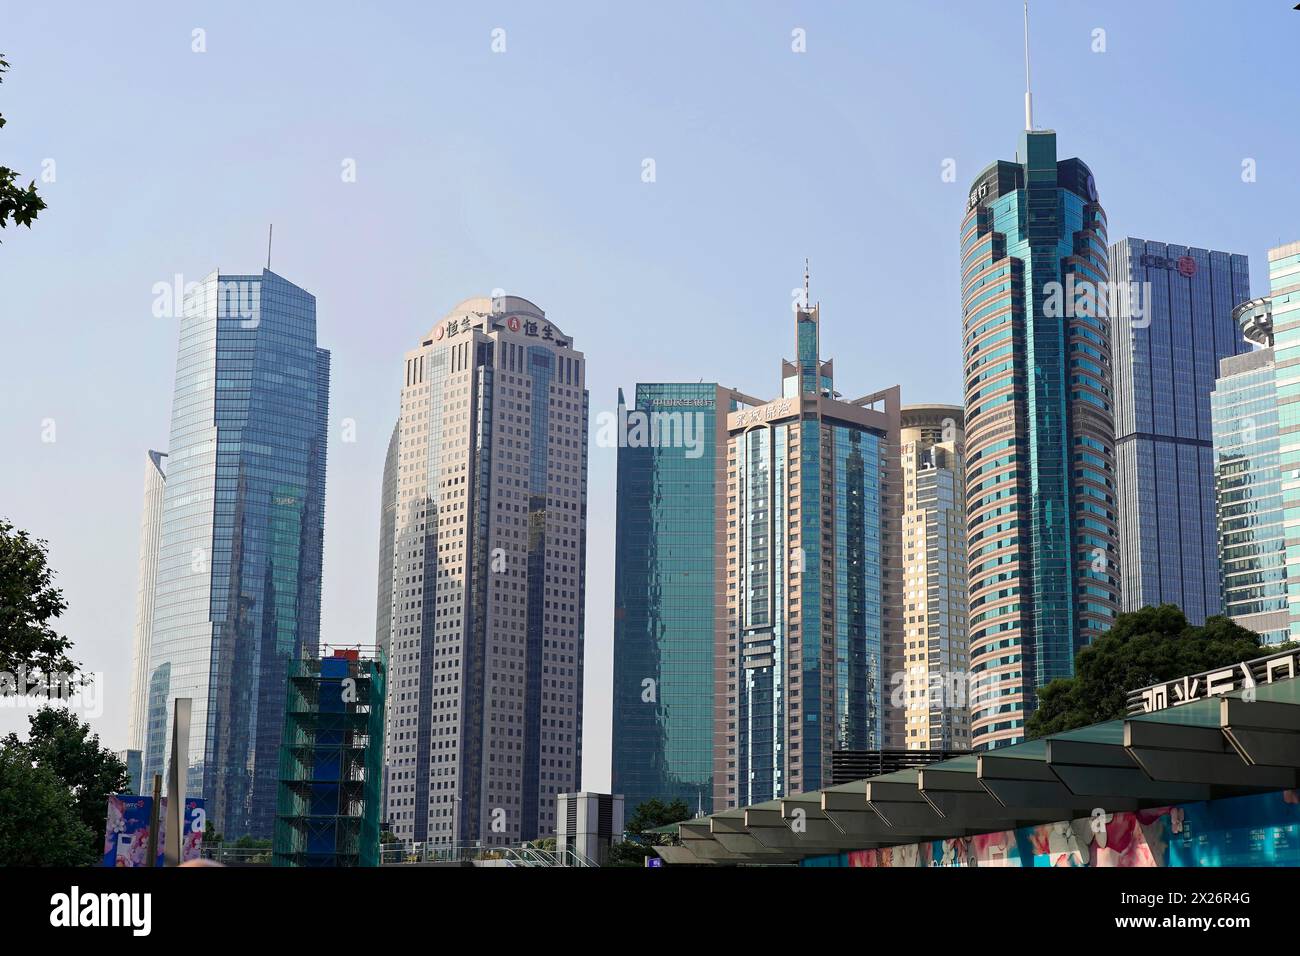 The tallest skyscrapers of the Pudong Special Economic Zone, skyline with several skyscrapers against a clear blue sky, Shanghai, China Stock Photo